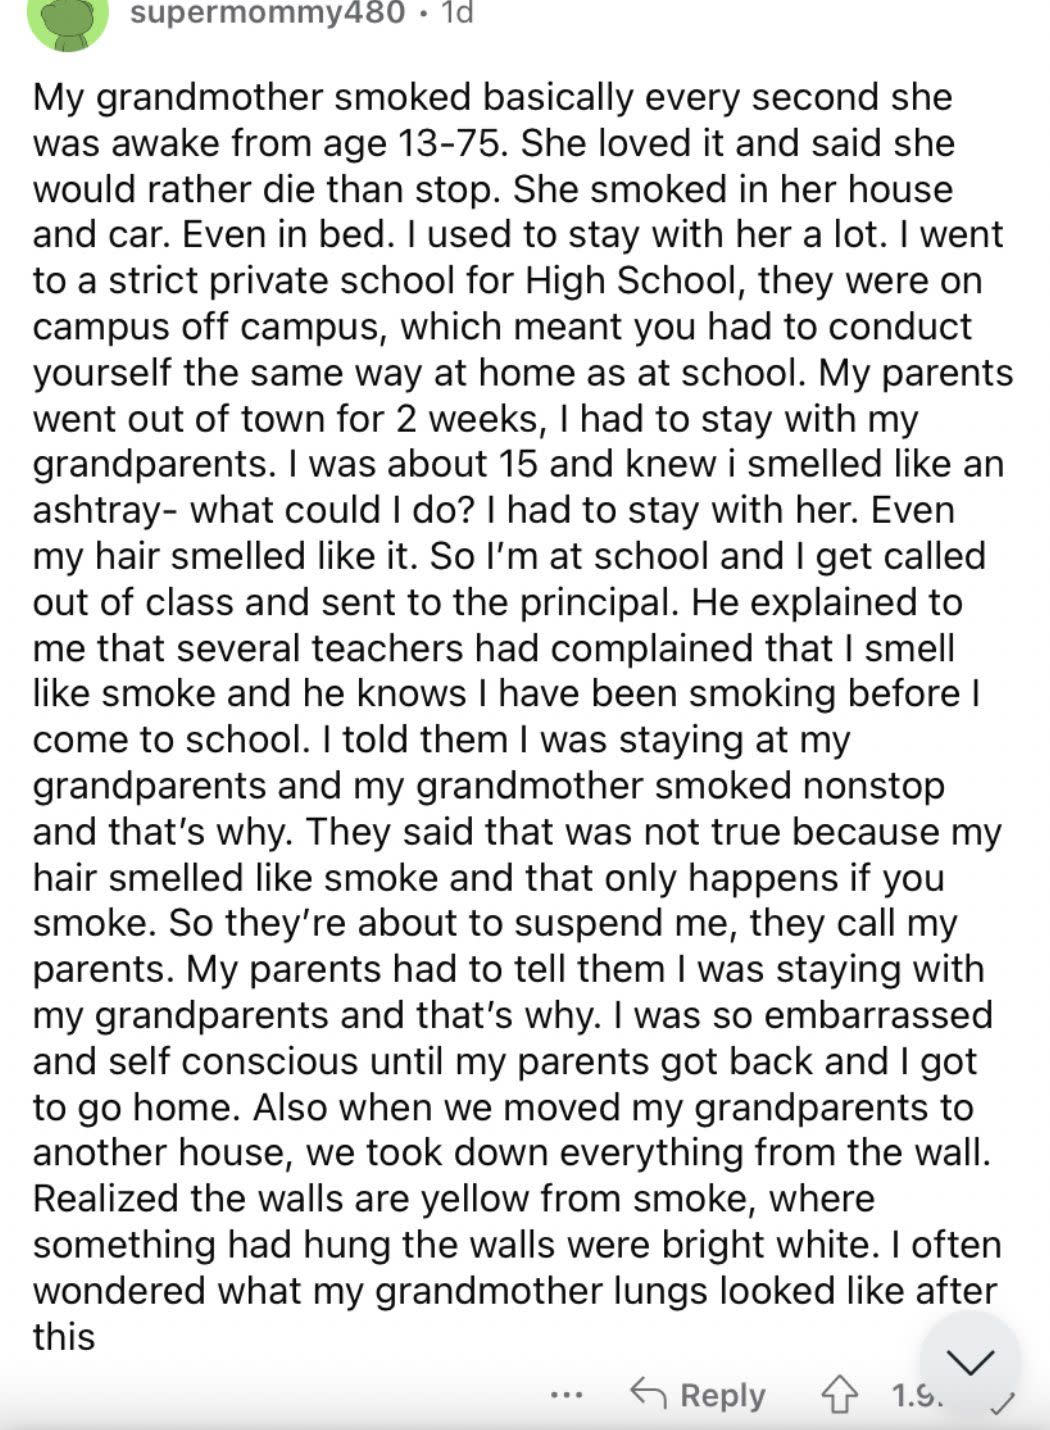 Reddit screenshot about someone who had a grandma that smoked all the time.